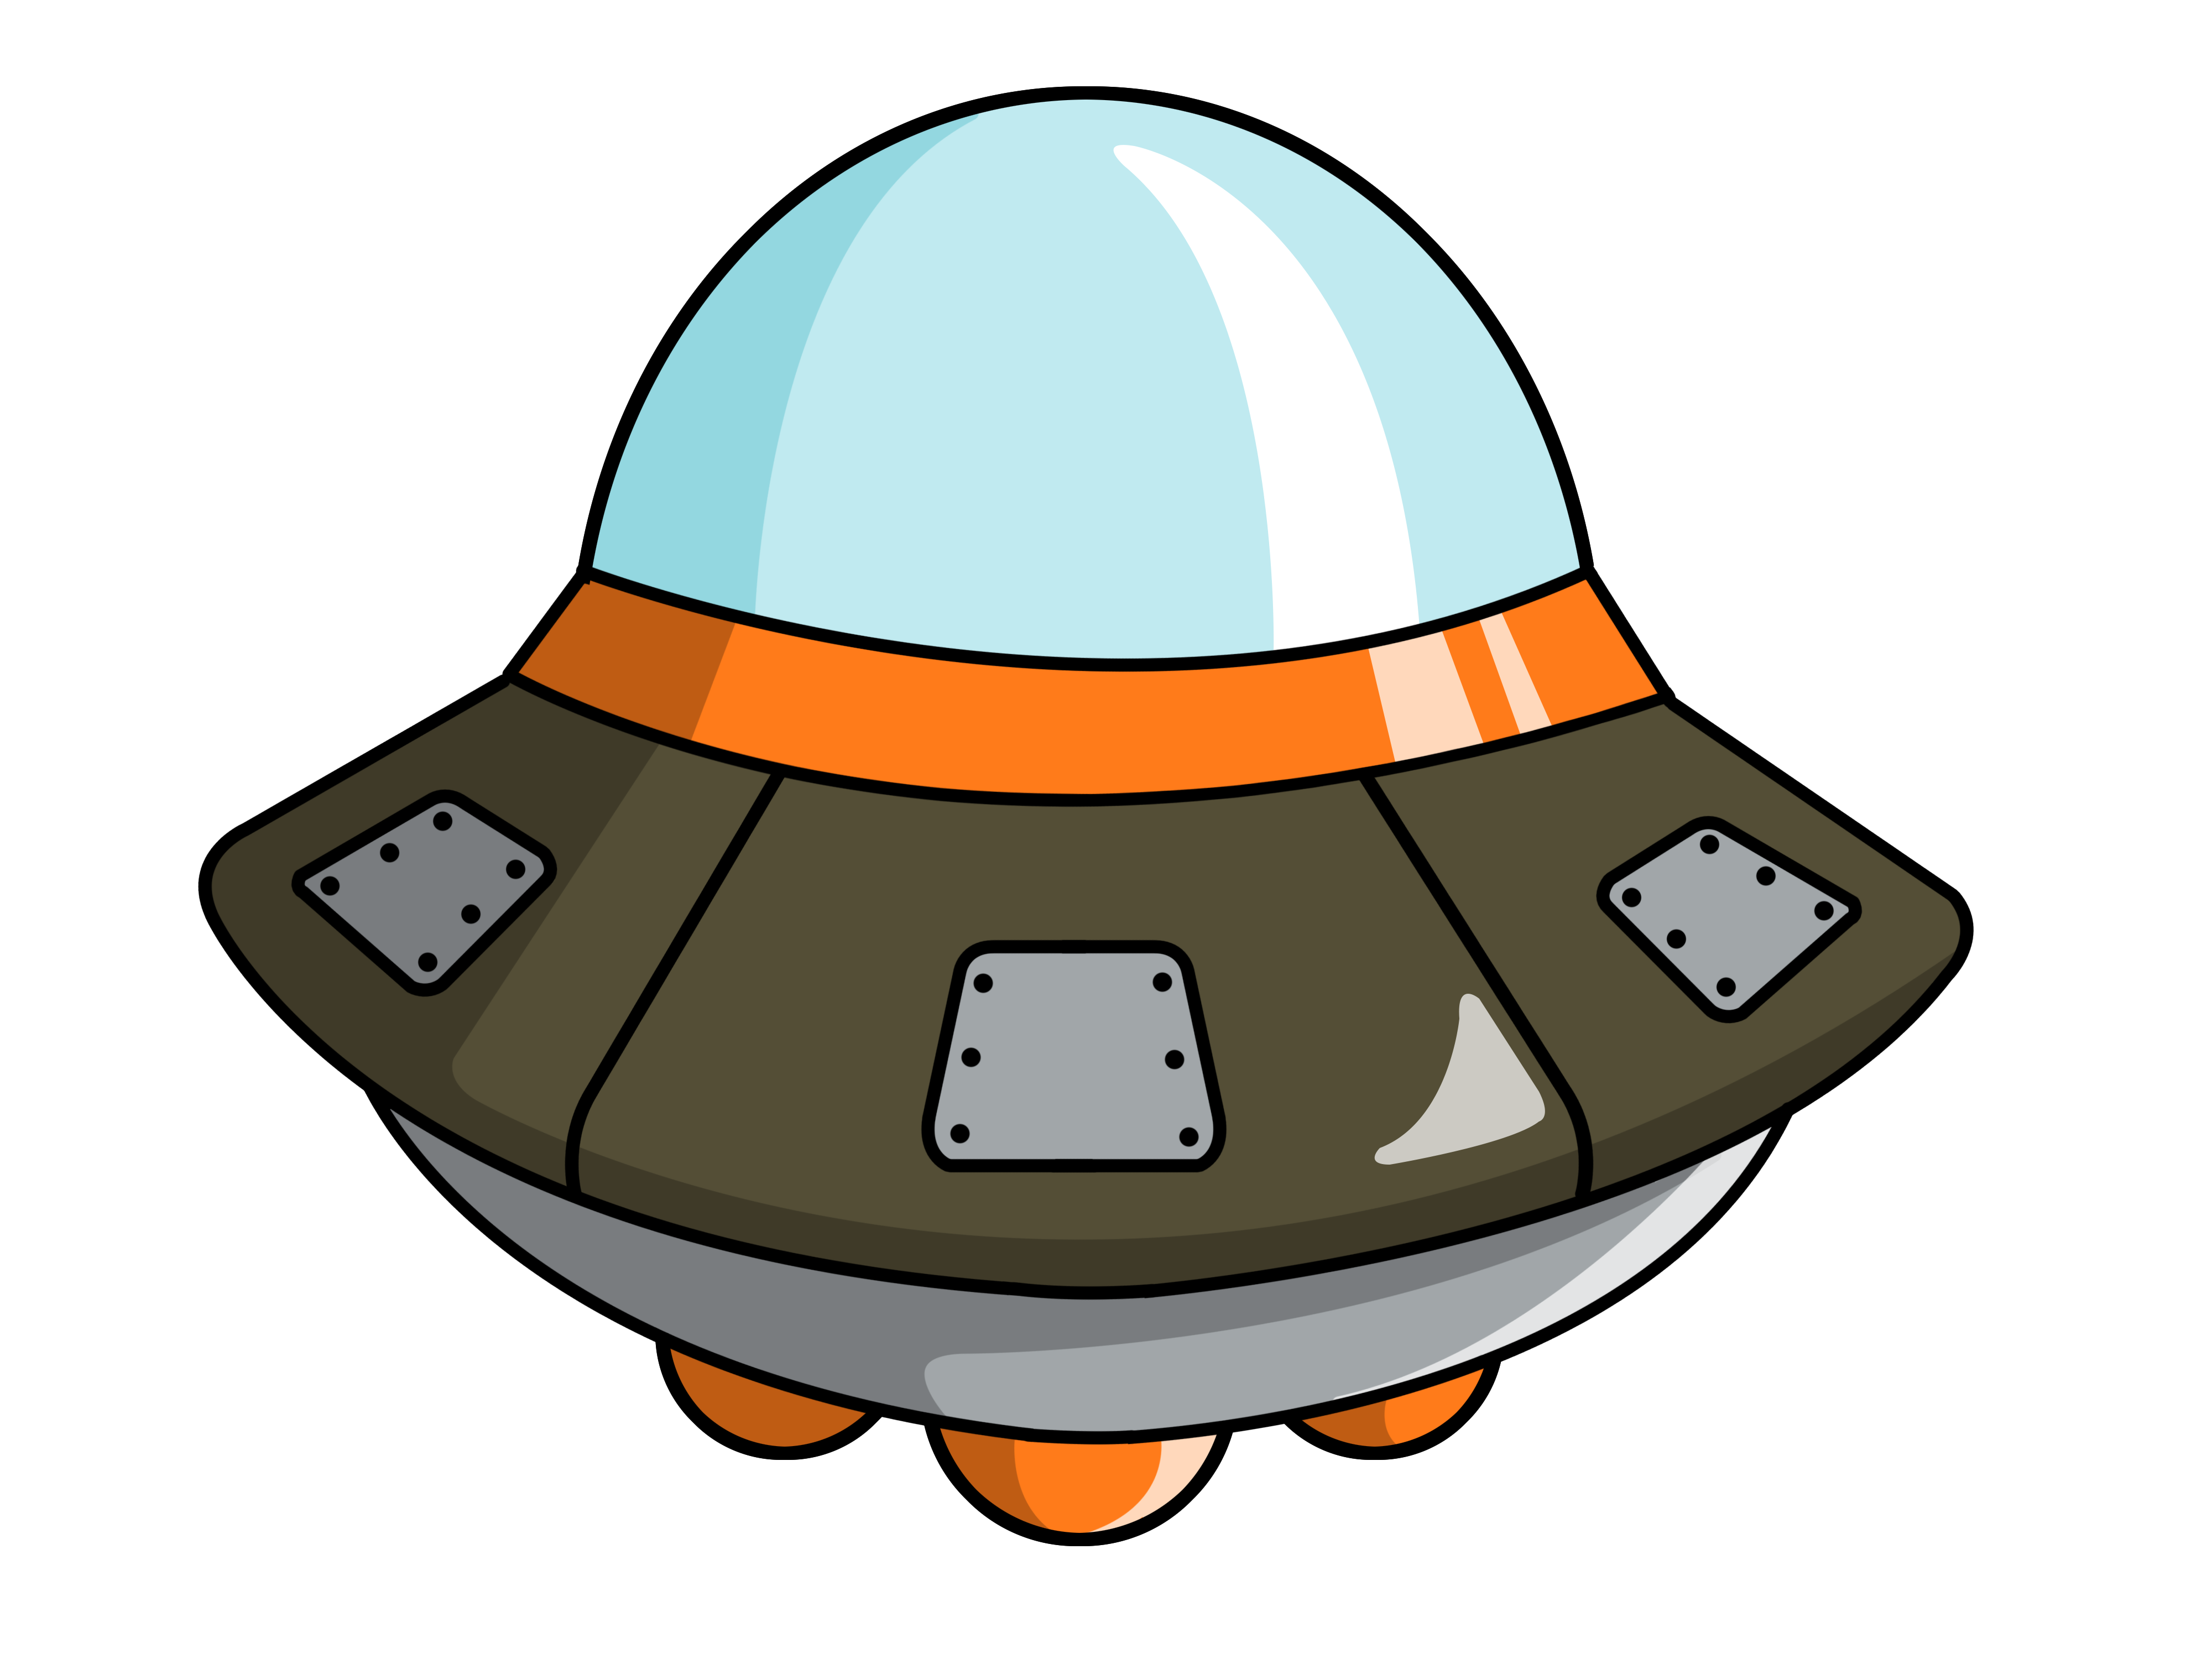 Free Cartoon Spaceship Pictures, Download Free Clip Art